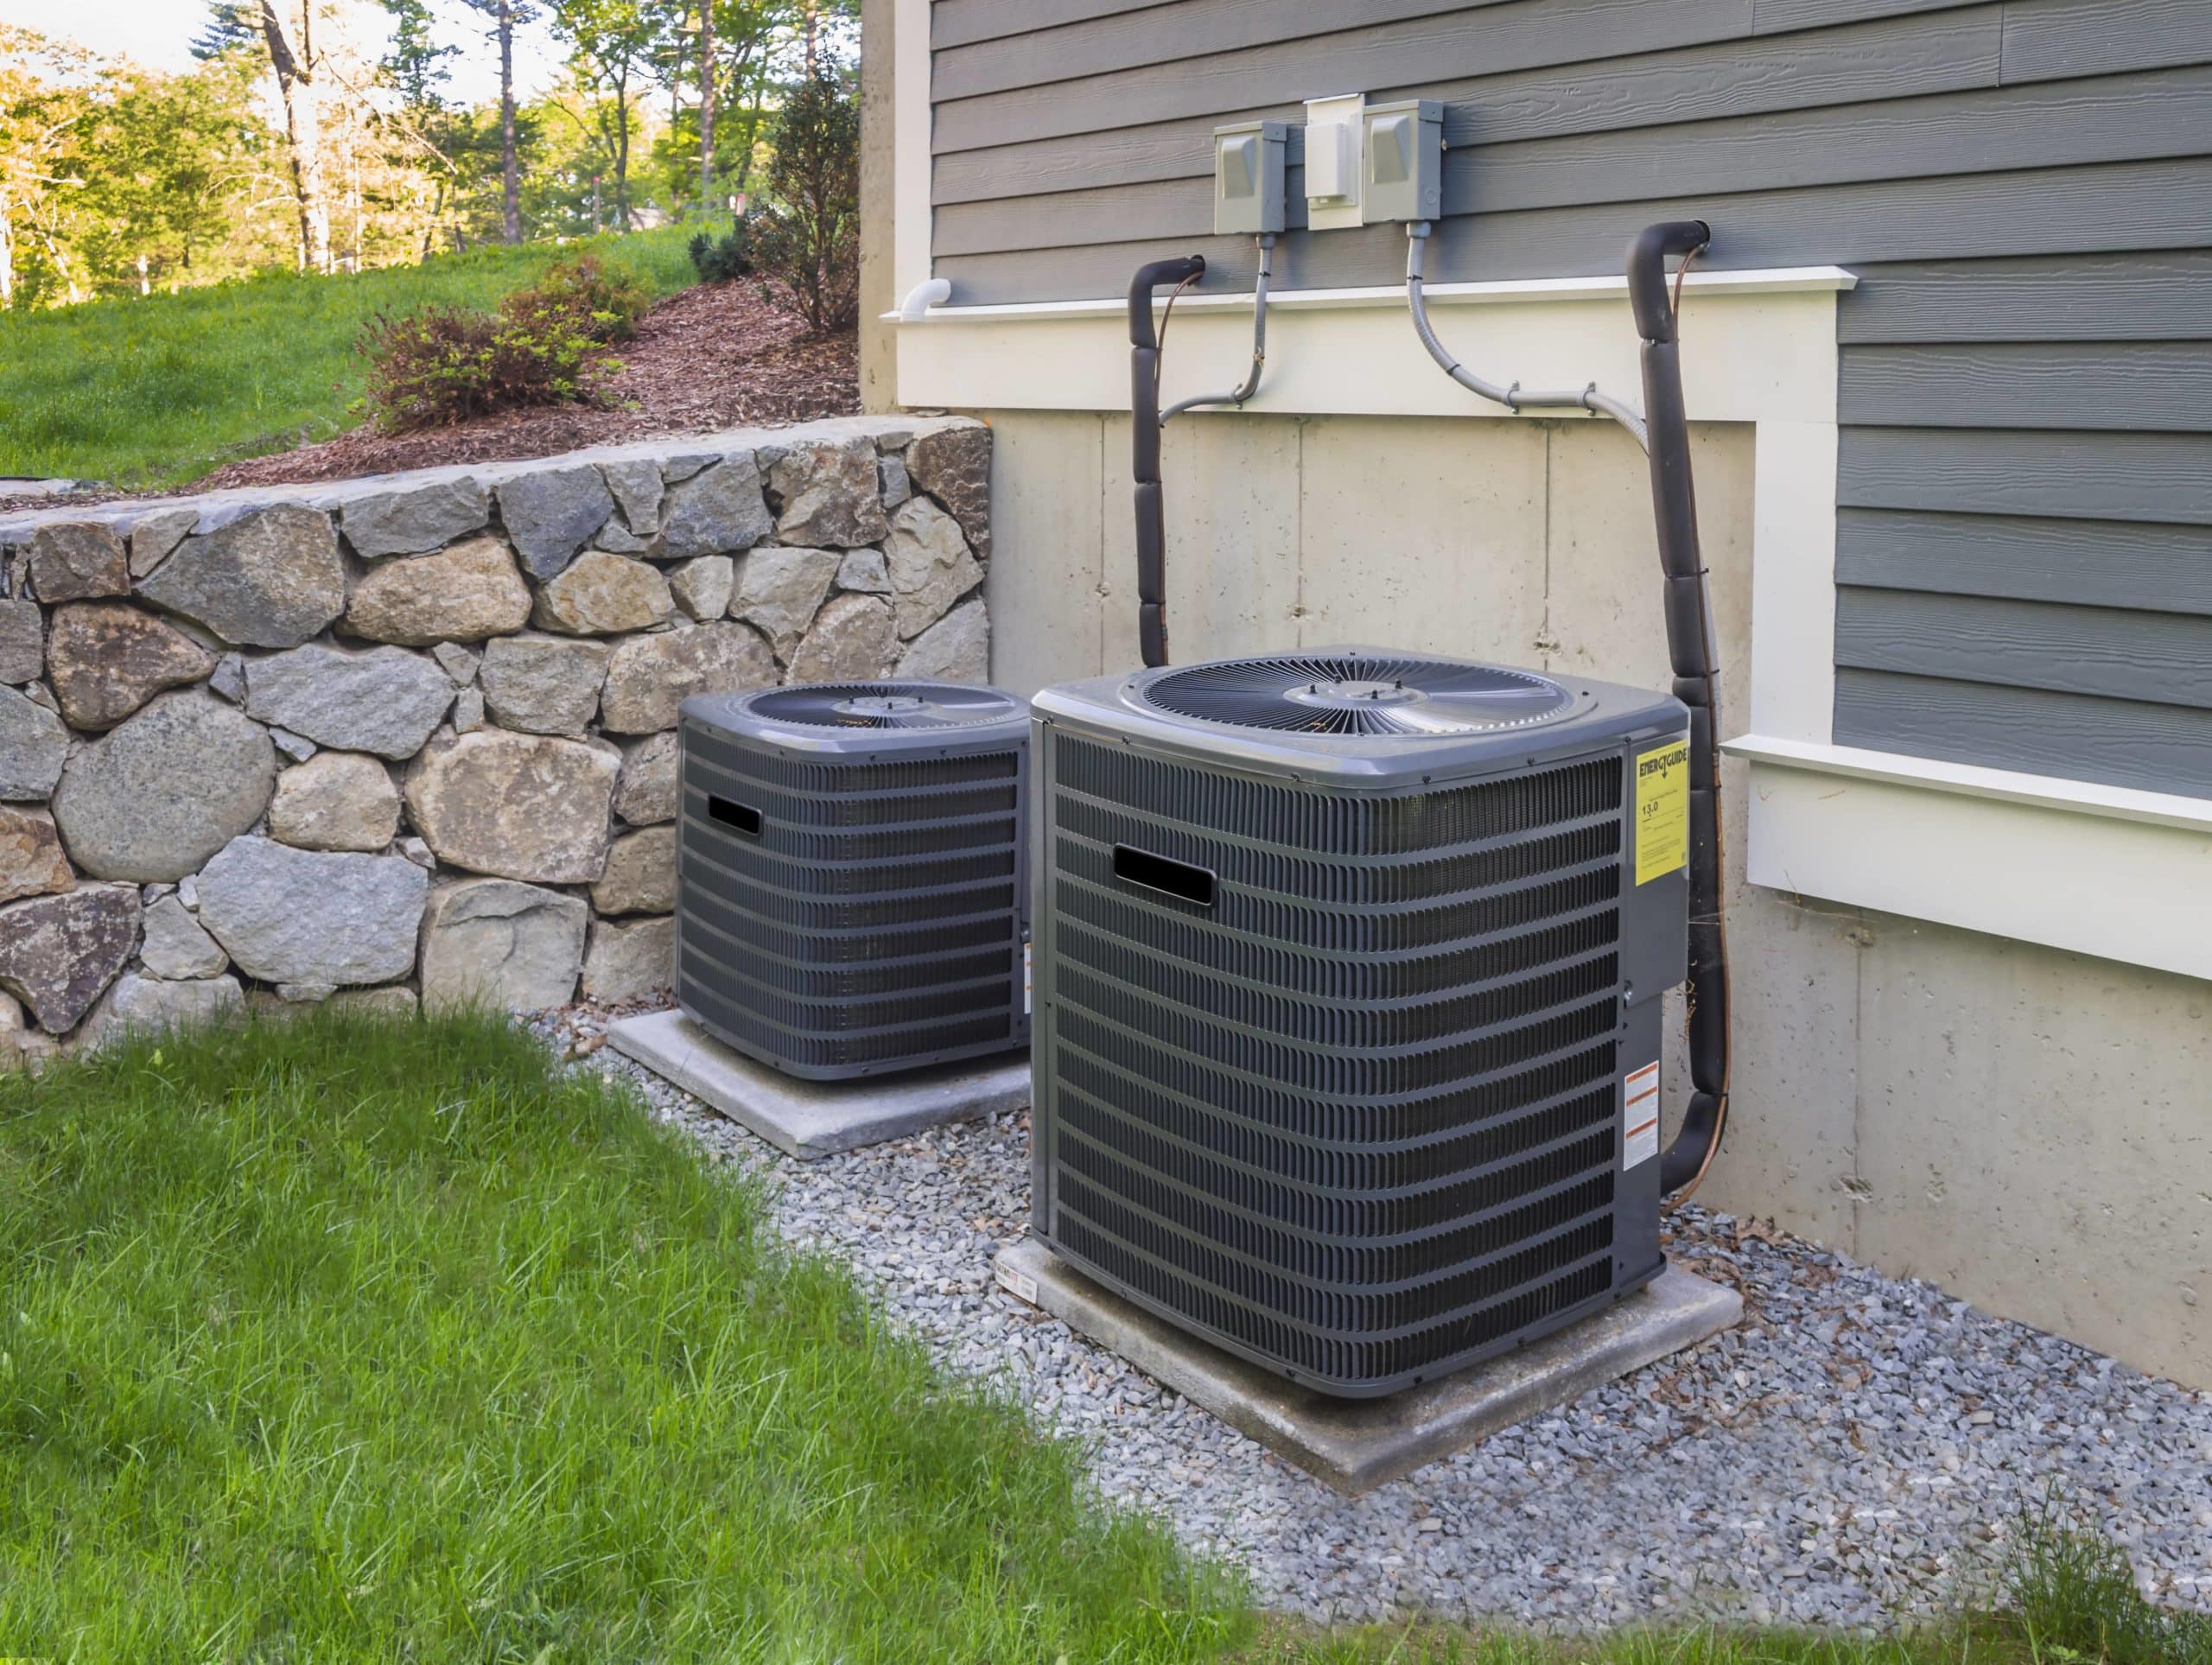 Image of central A/C unit outside a customer's house